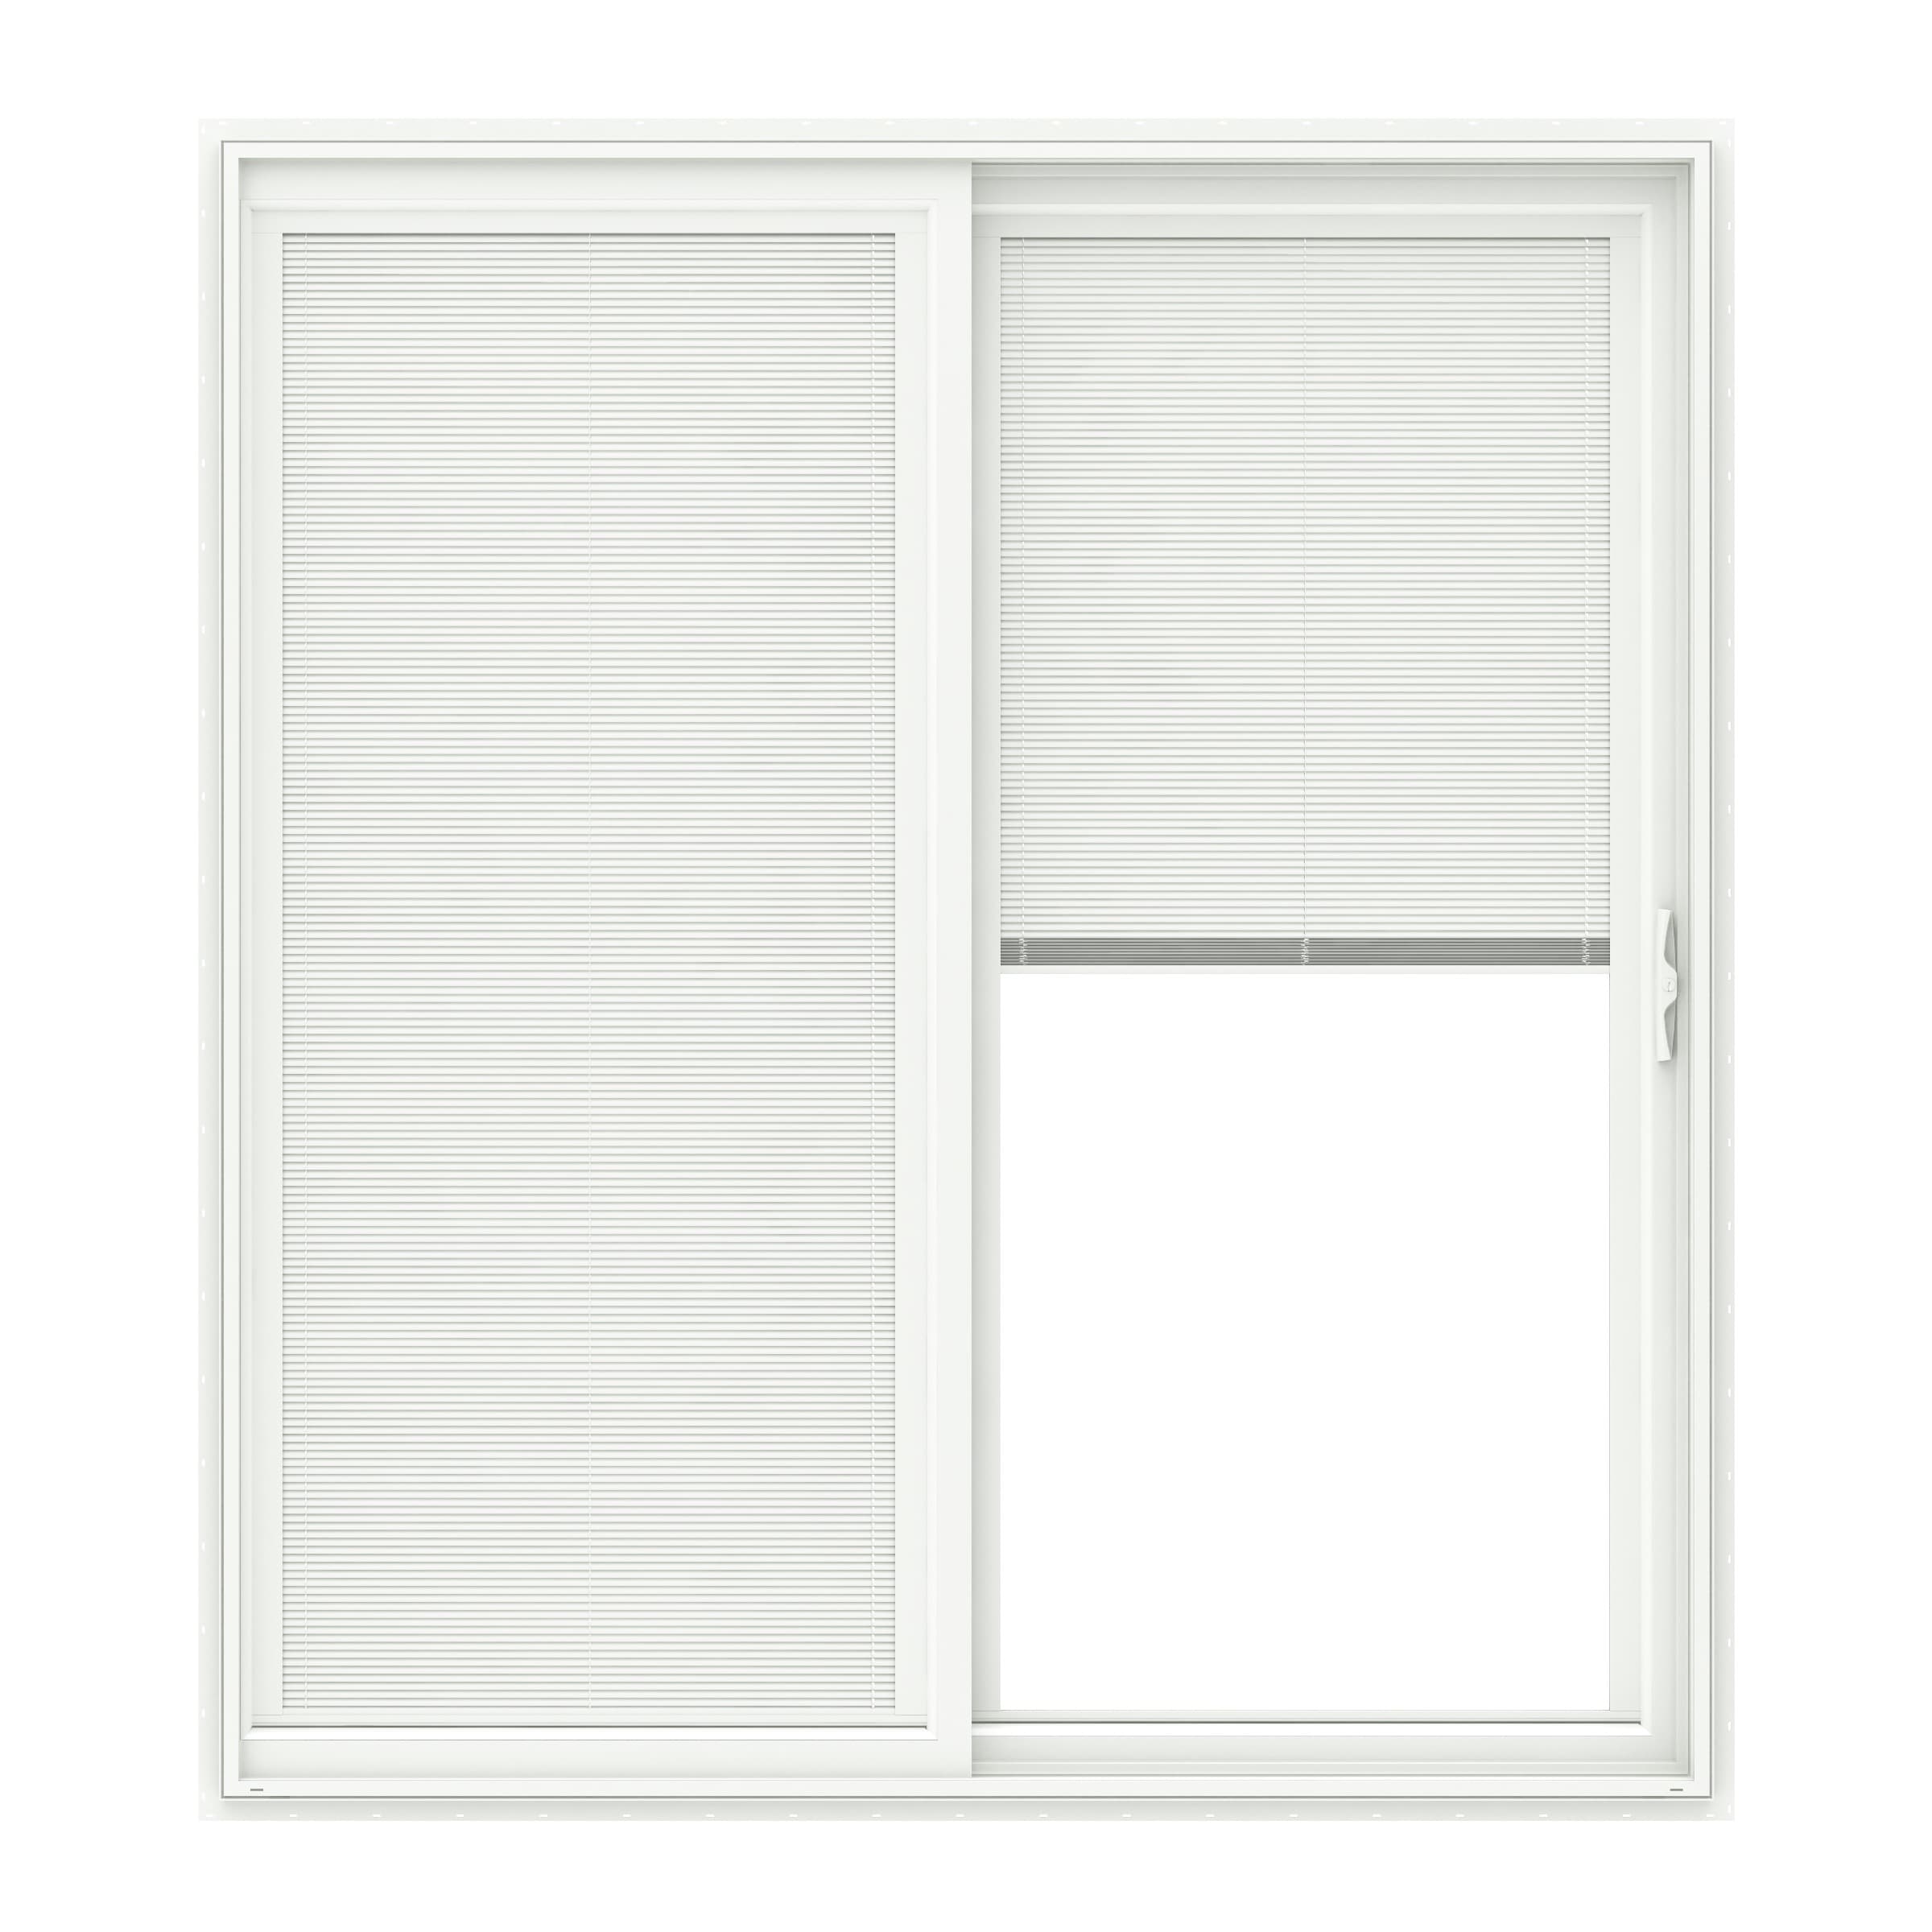 150 Series 60-in x 80-in Low-e Blinds Between The Glass White Vinyl Sliding Right-Hand Sliding Double Patio Door | - Pella 1000010244